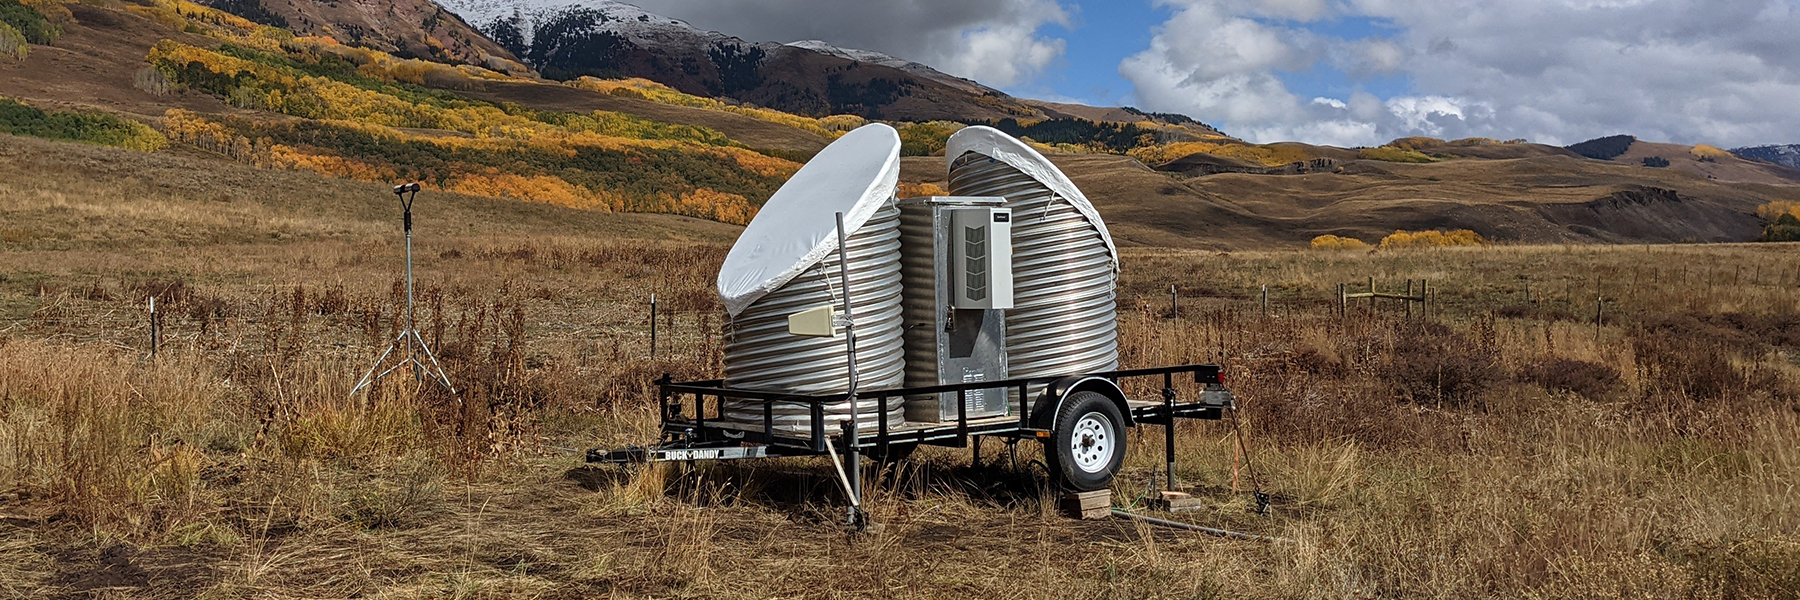 The PSL snow-level radar deployed near Crested Butte, Colorado for SPLASH field project. The same instrument was used in this study from a different field project in North Carolina. Photo Credit: Jackson Osborn, NOAA